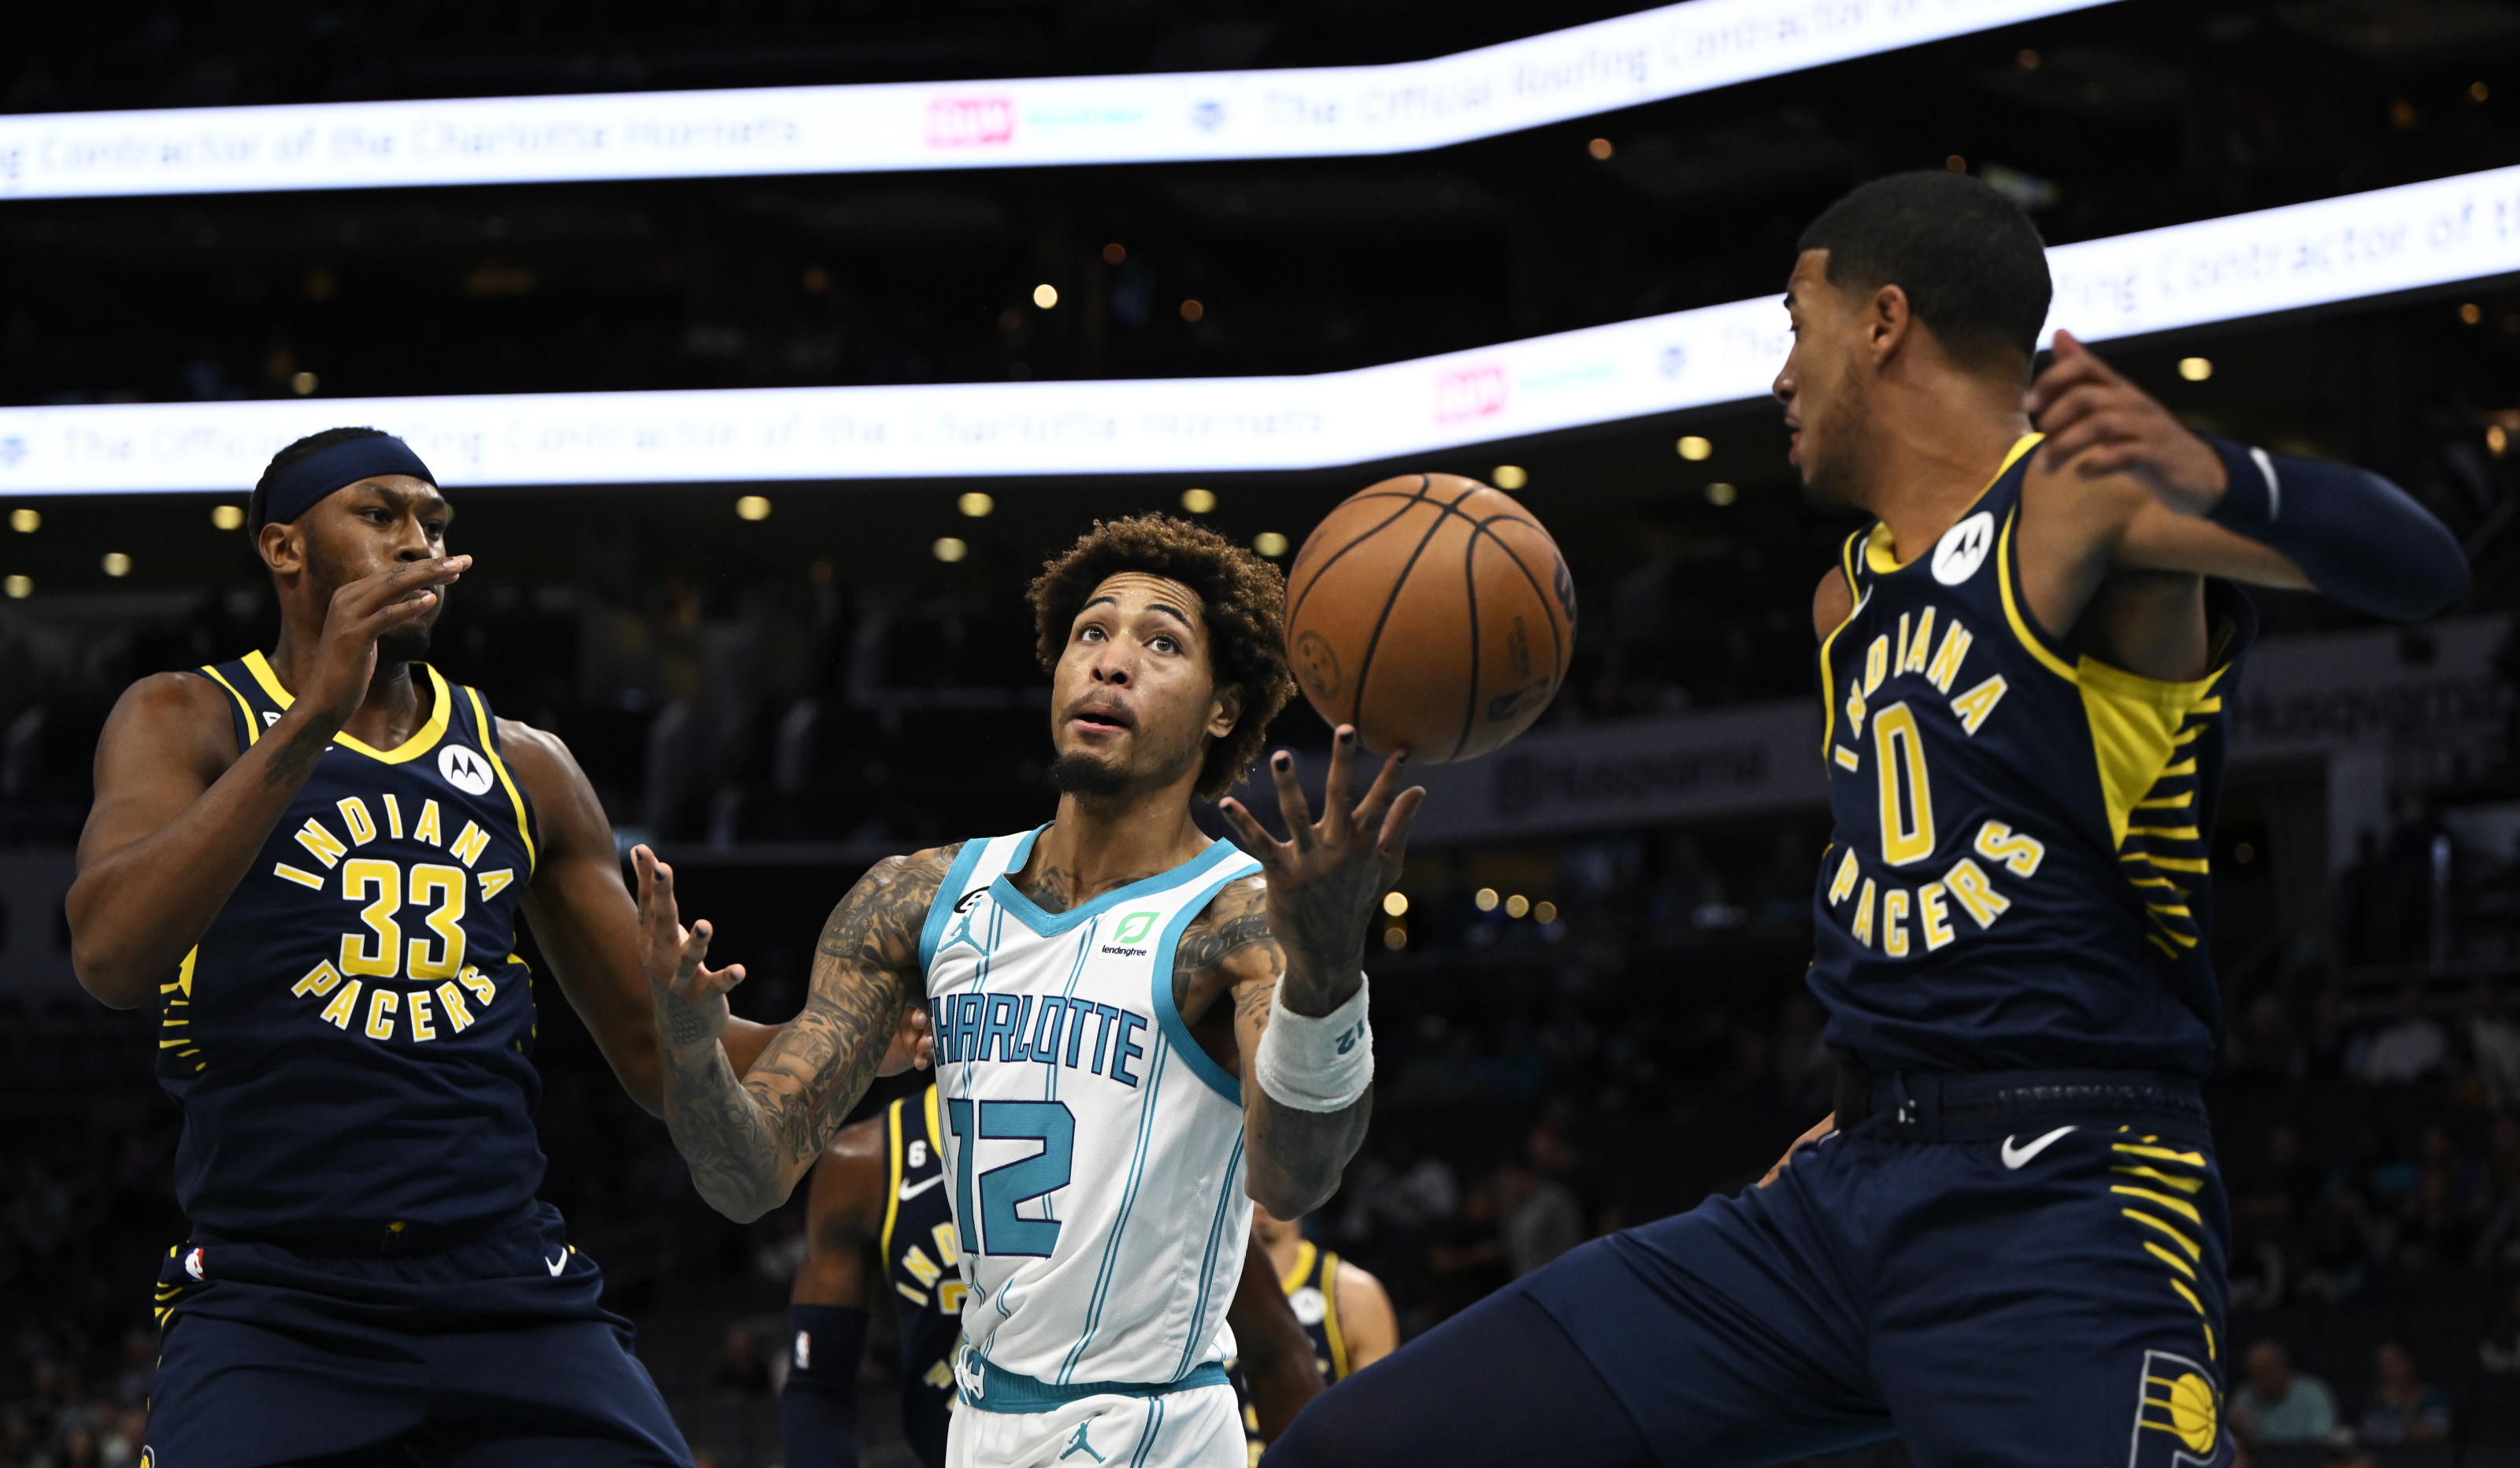 Charlotte Hornets vs. Indiana Pacers odds, tips and betting trends